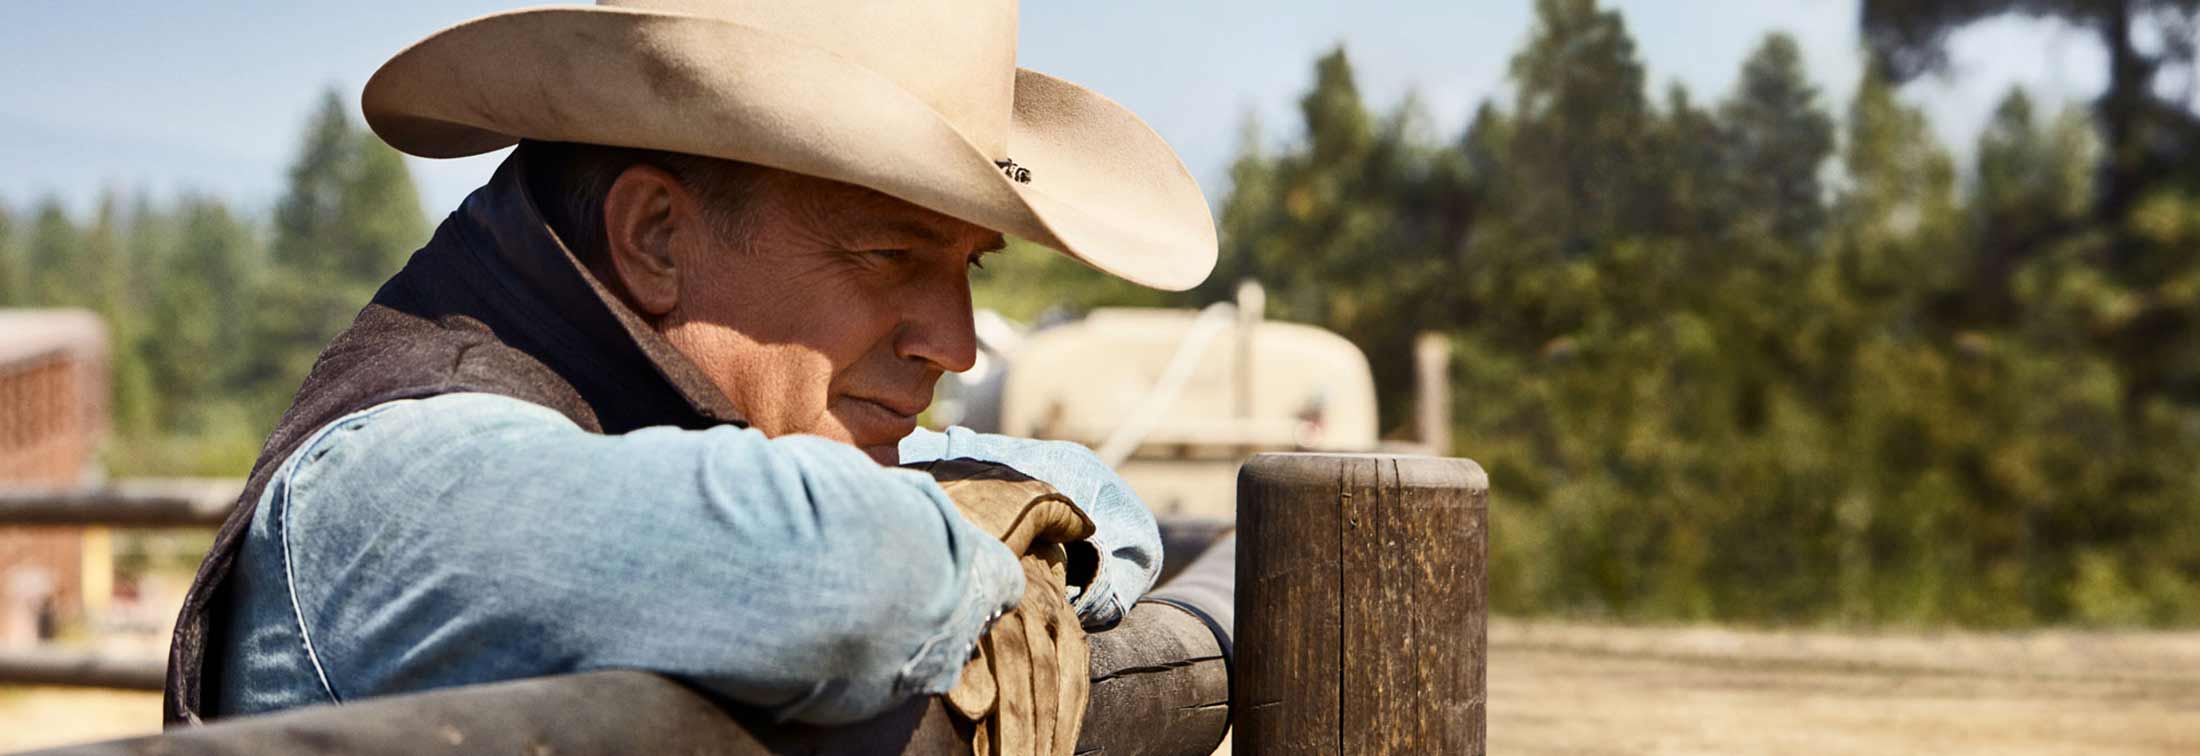 Yellowstone: Seasons 1 & 2 - Kevin Costner surviving in the wild